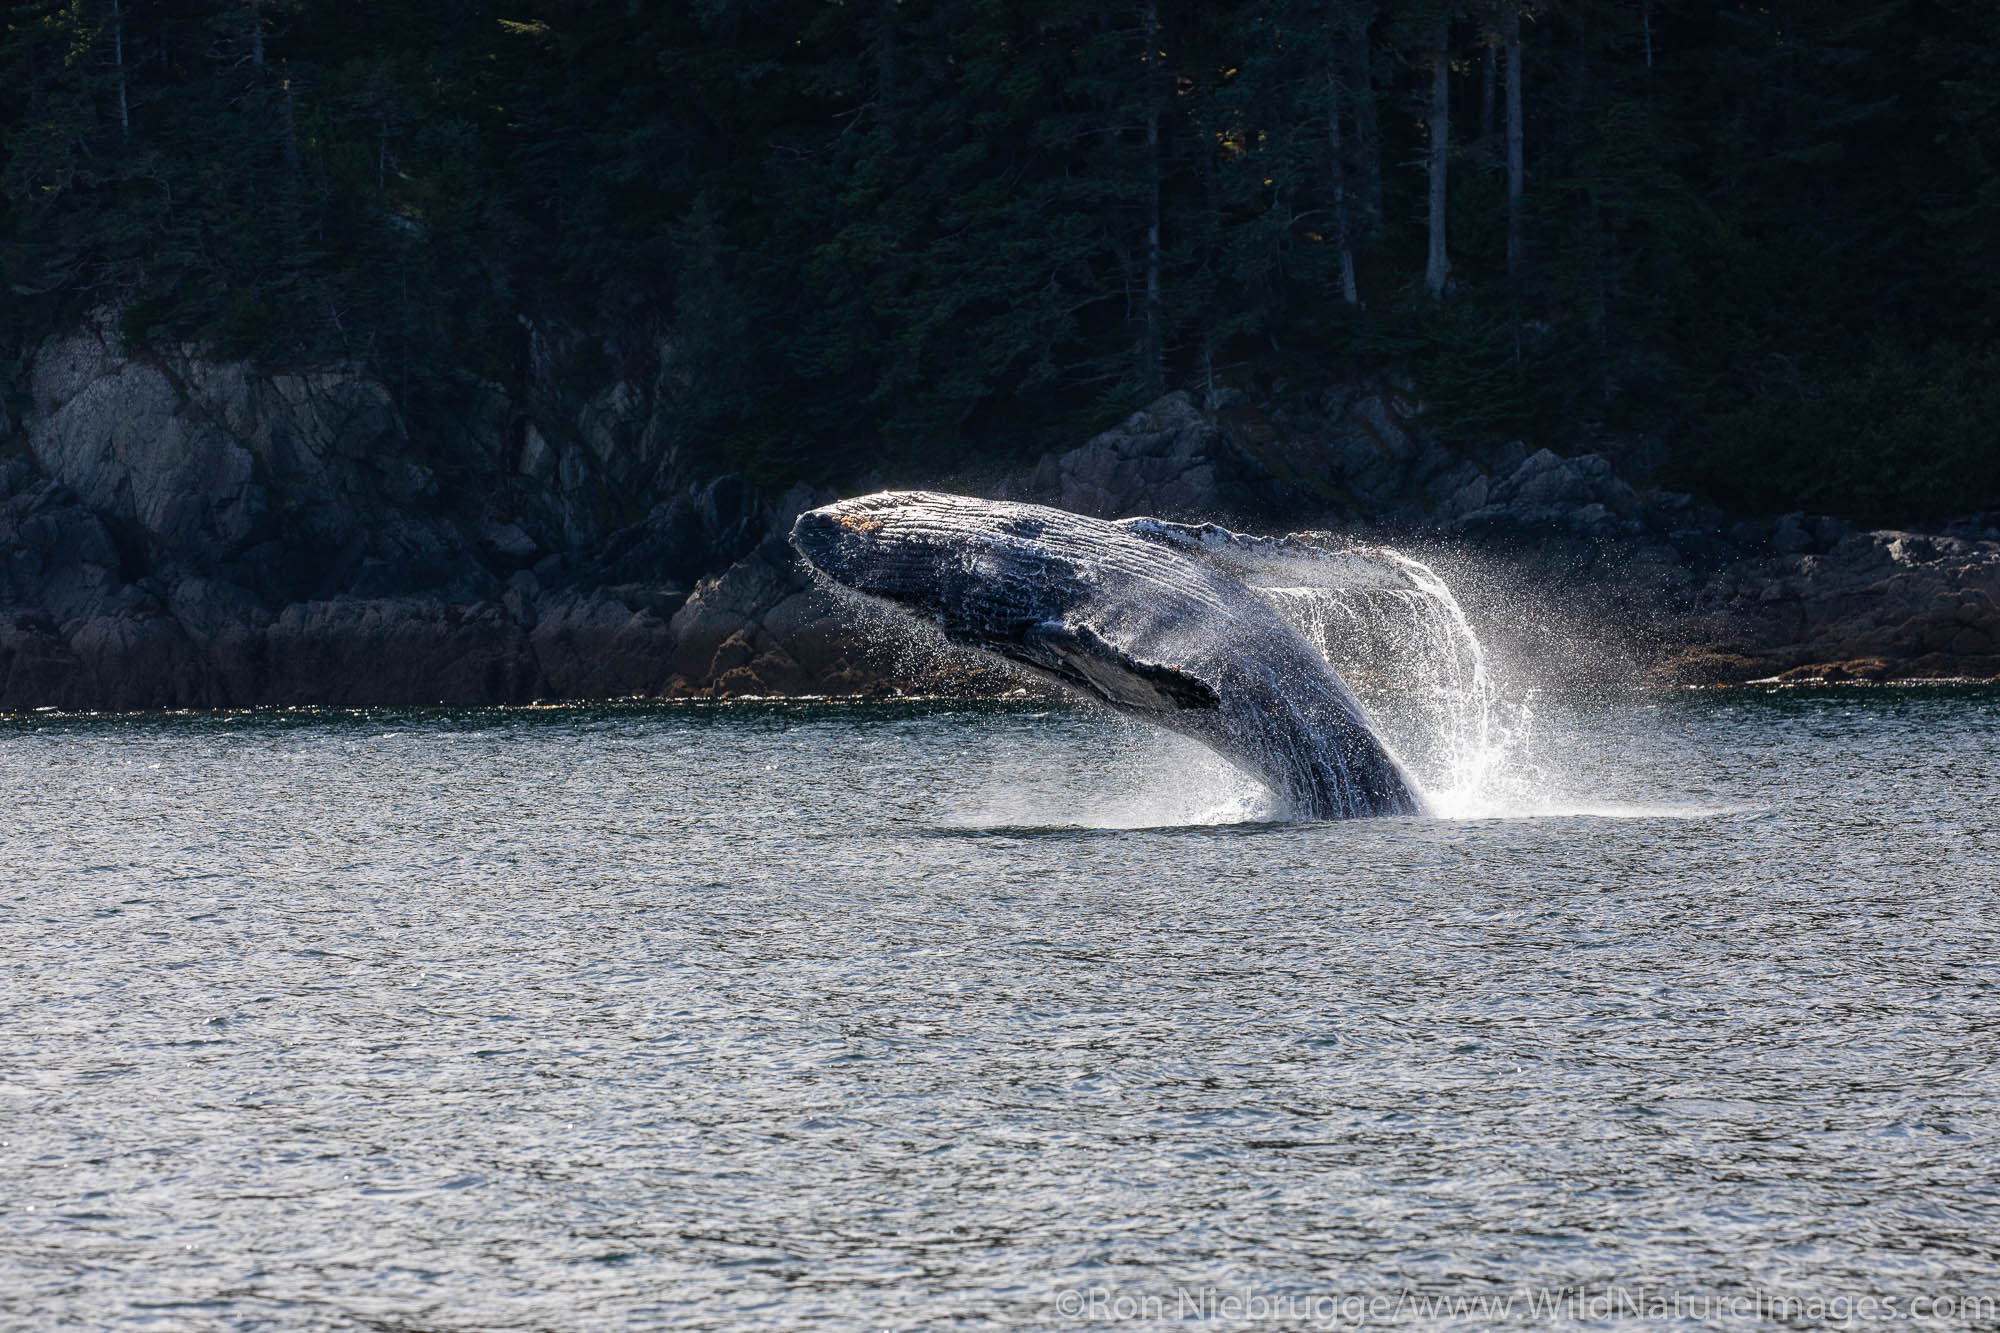 Breaching Humpback whale, Tongass National Forest, Alaska.